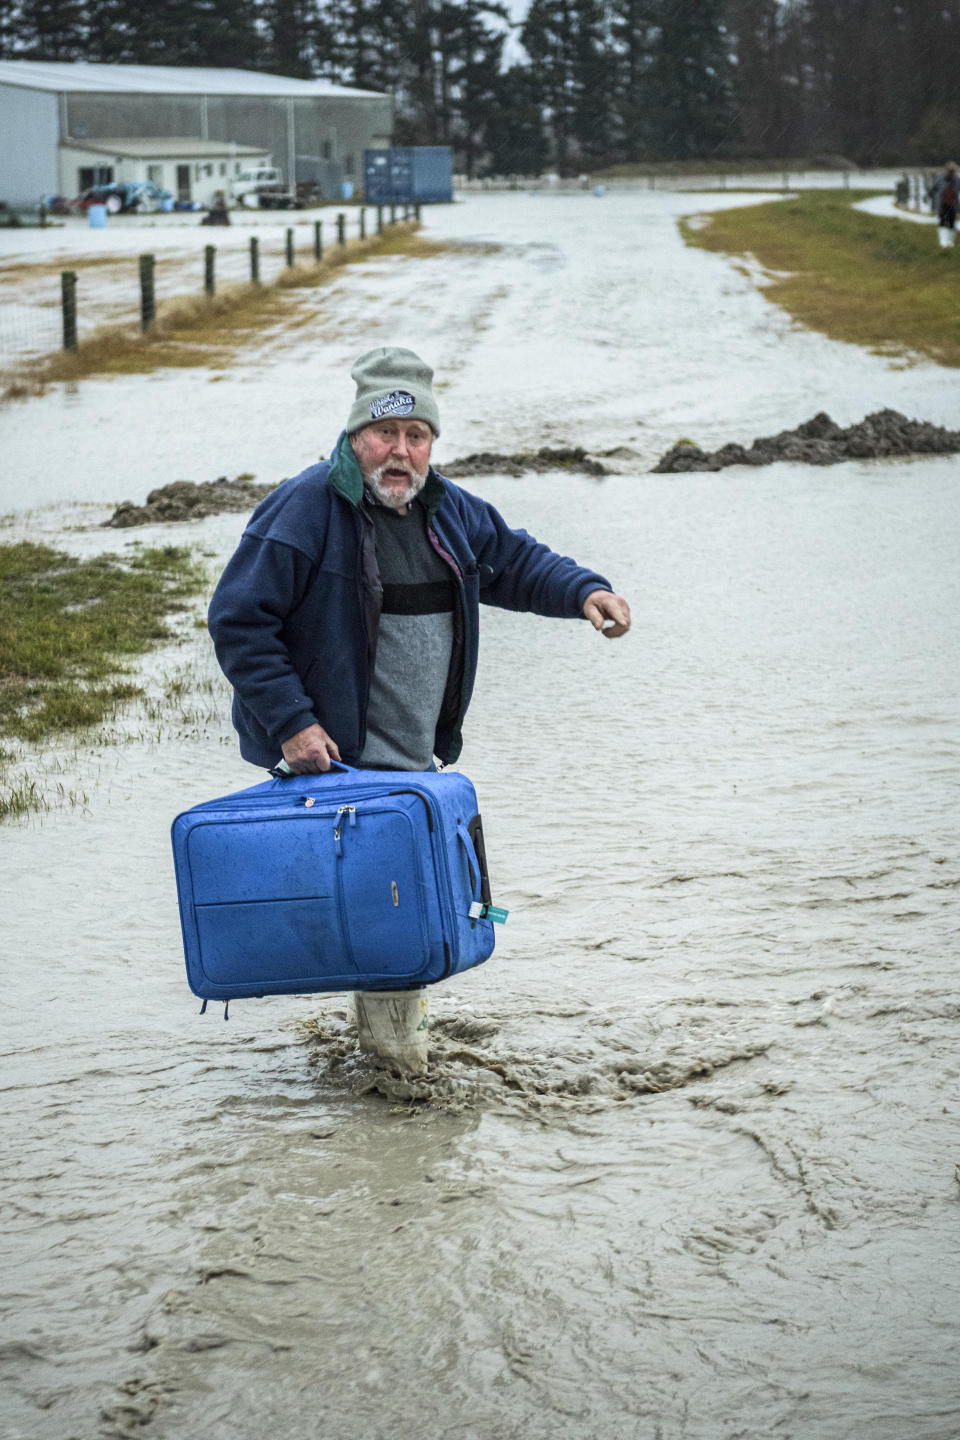 A man carries his suitcase as he is evacuated from floods by New Zealand Defense Force personnel near Ashburton in New Zealand's South Island, Sunday May 30, 2021. Several hundred people in New Zealand were evacuated from their homes Monday, May 31, 2021 as heavy rainfall caused flooding in the Canterbury region. (Corp. Sean Spivey/NZDF via AP)